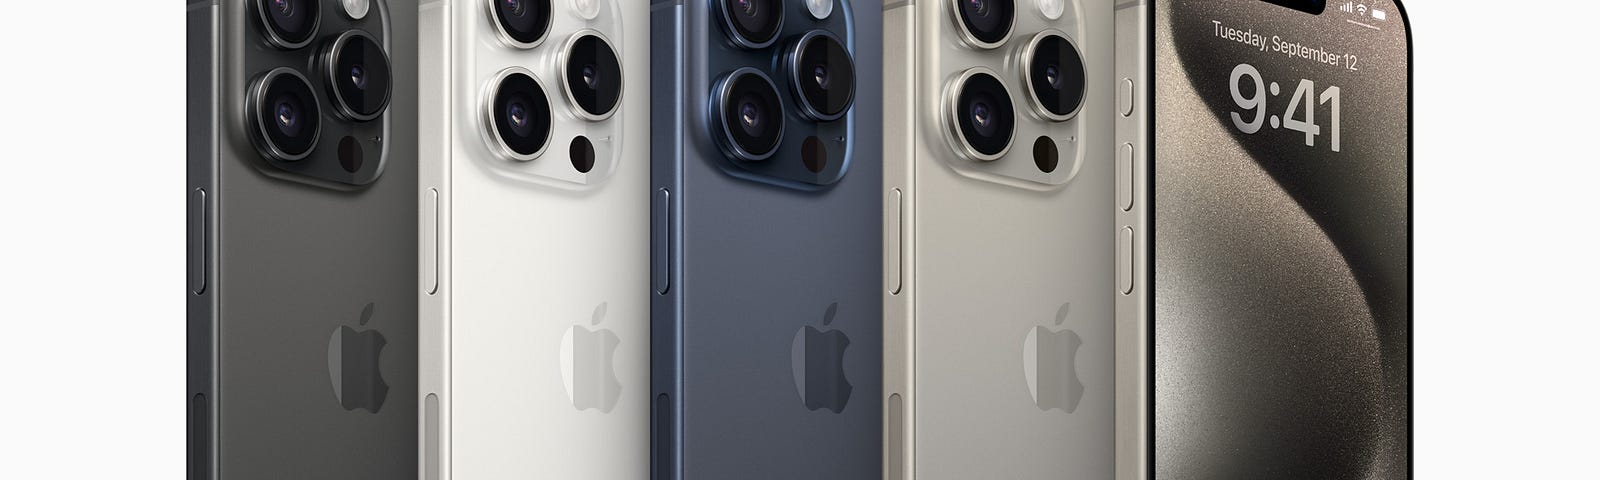 The iPhone 15 Pro lineup.